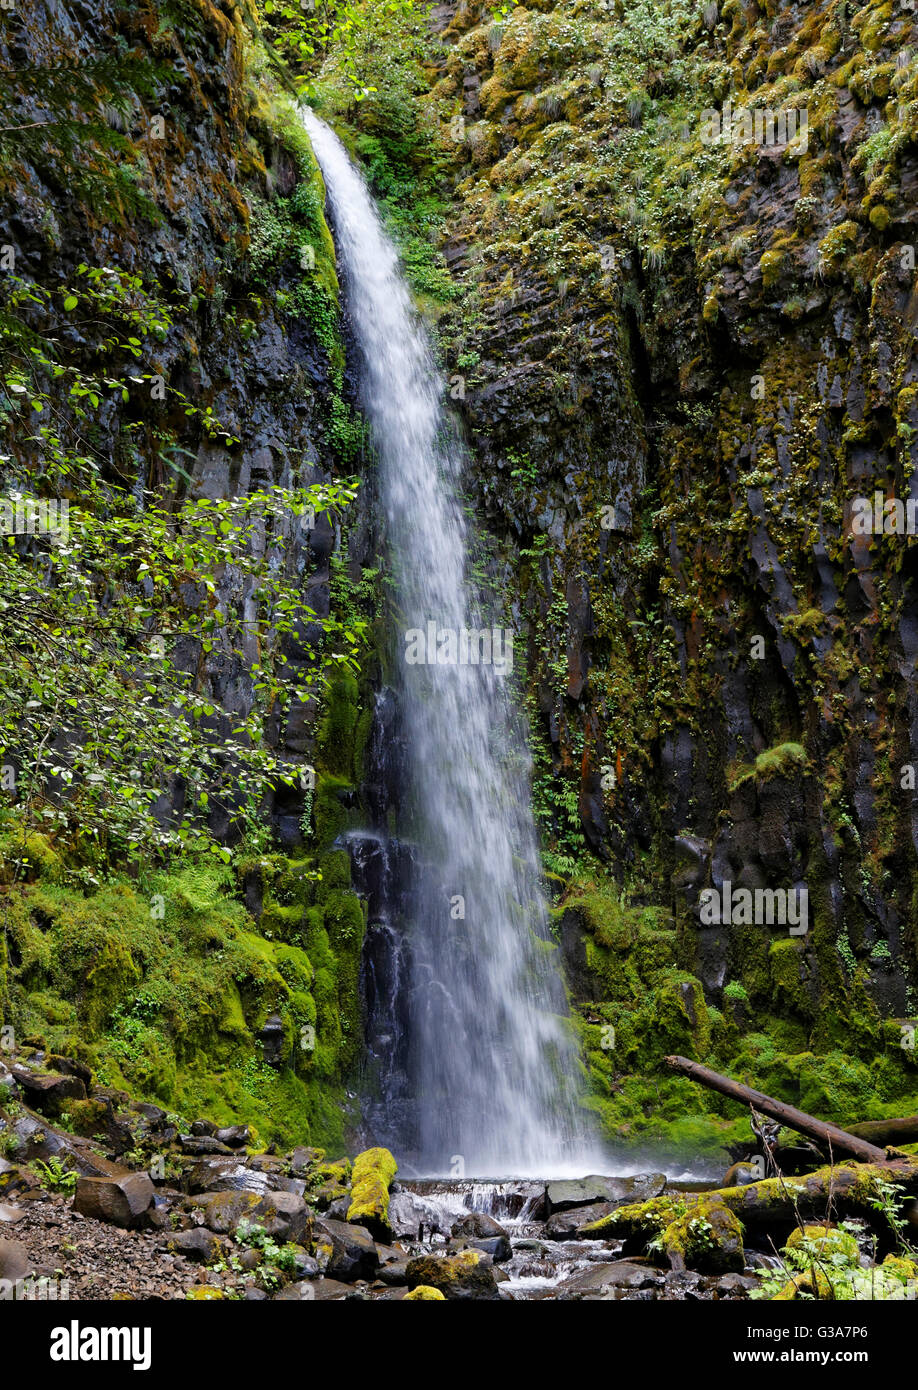 42,138.08946 Thirty 30 foot tall waterfall cascading over a basalt moss covered cliff into a pool of water below Stock Photo